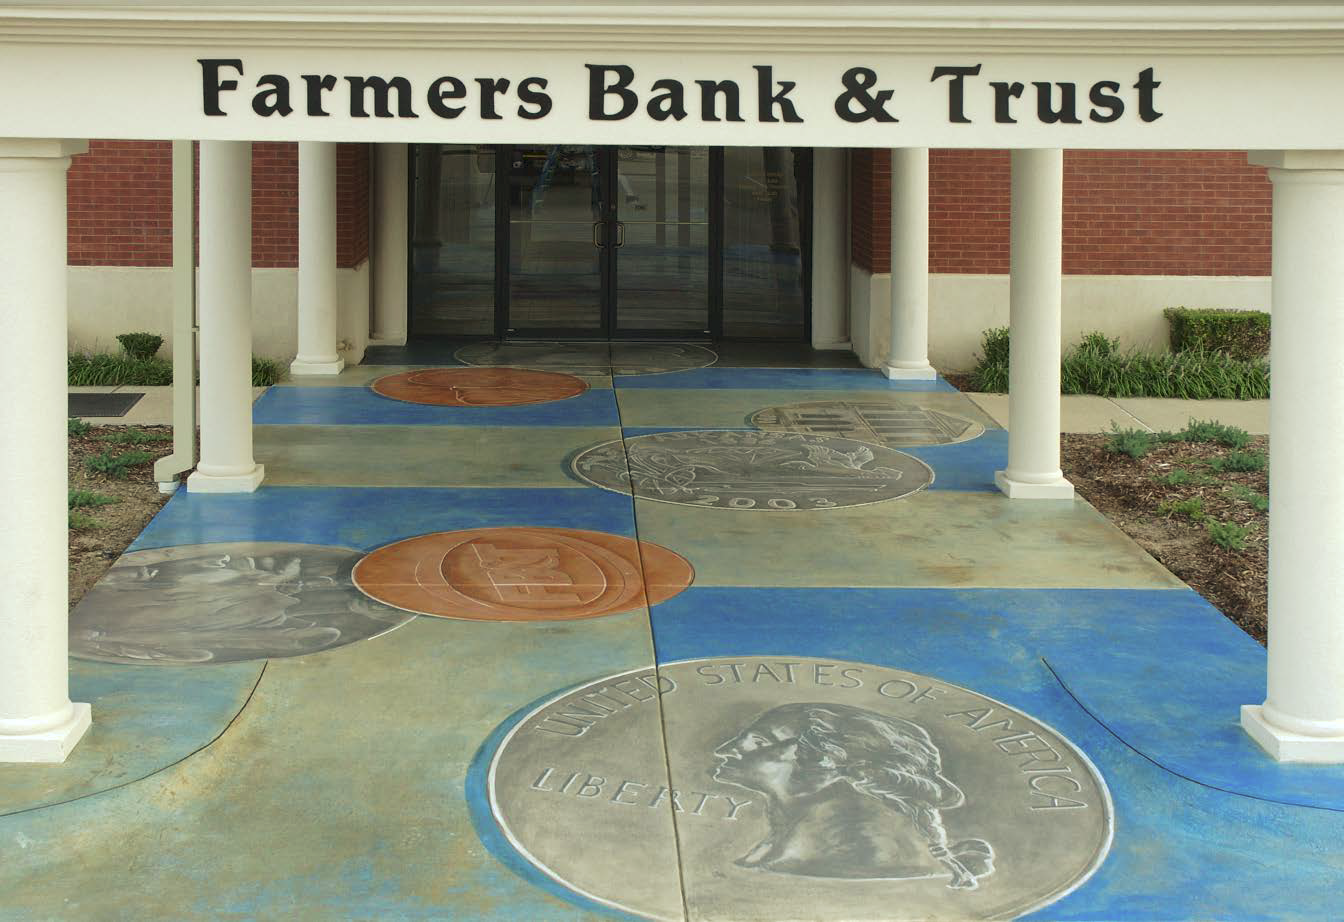 Bank entrance that has been stained with images of coins.